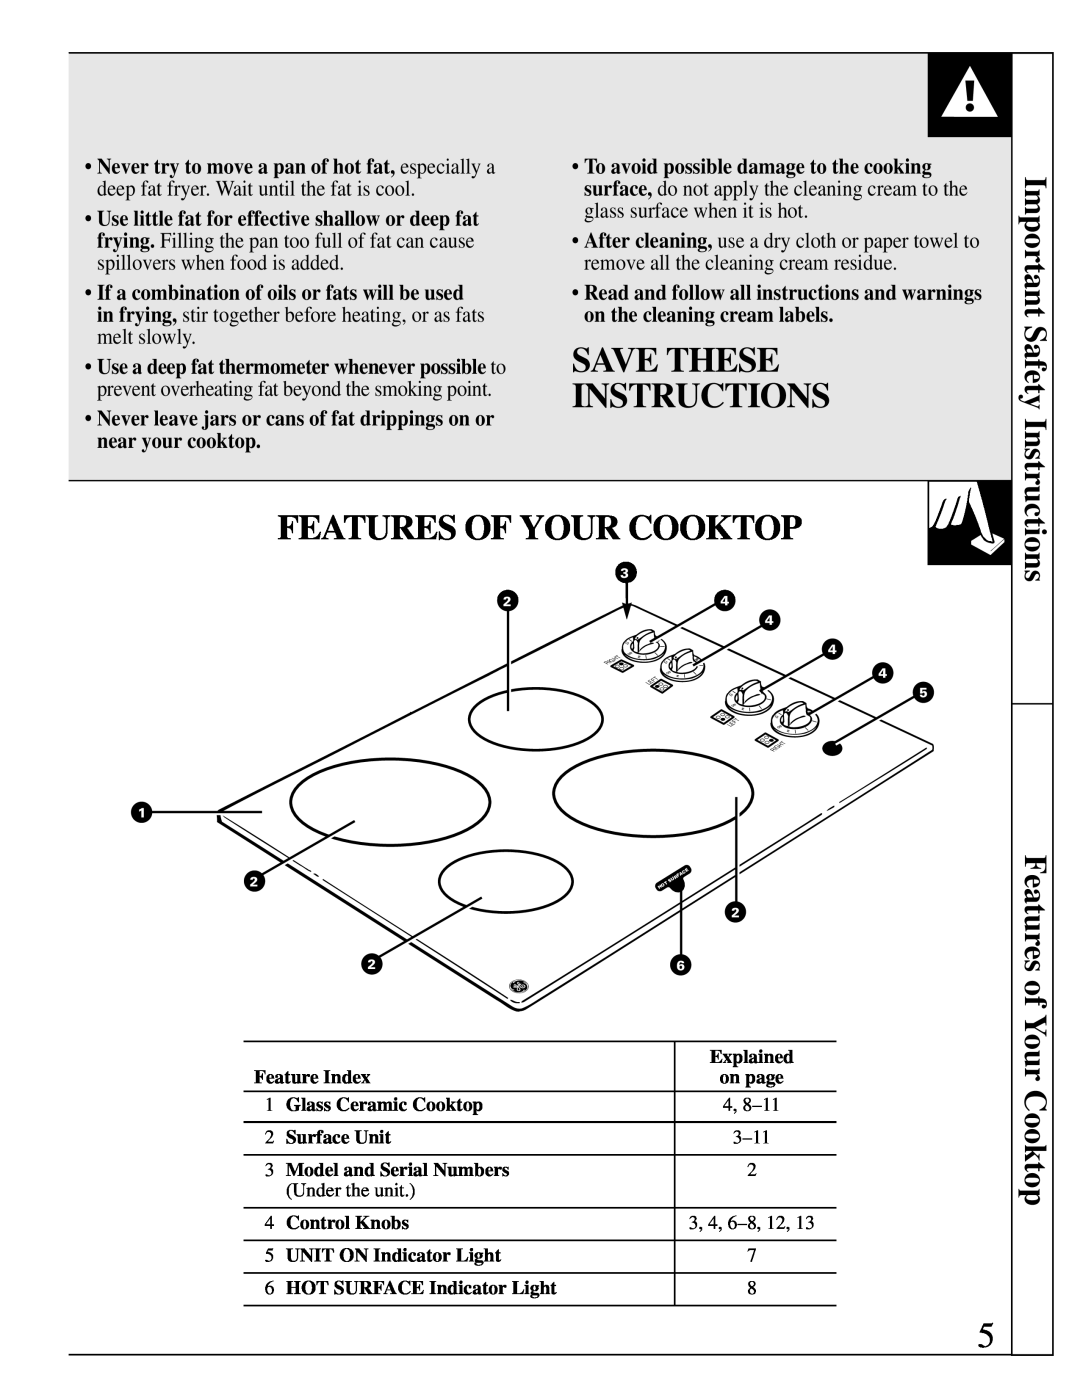 GE JP340 Save These Instructions, Features Of Your Cooktop, Features of, Important Safety Instructions 